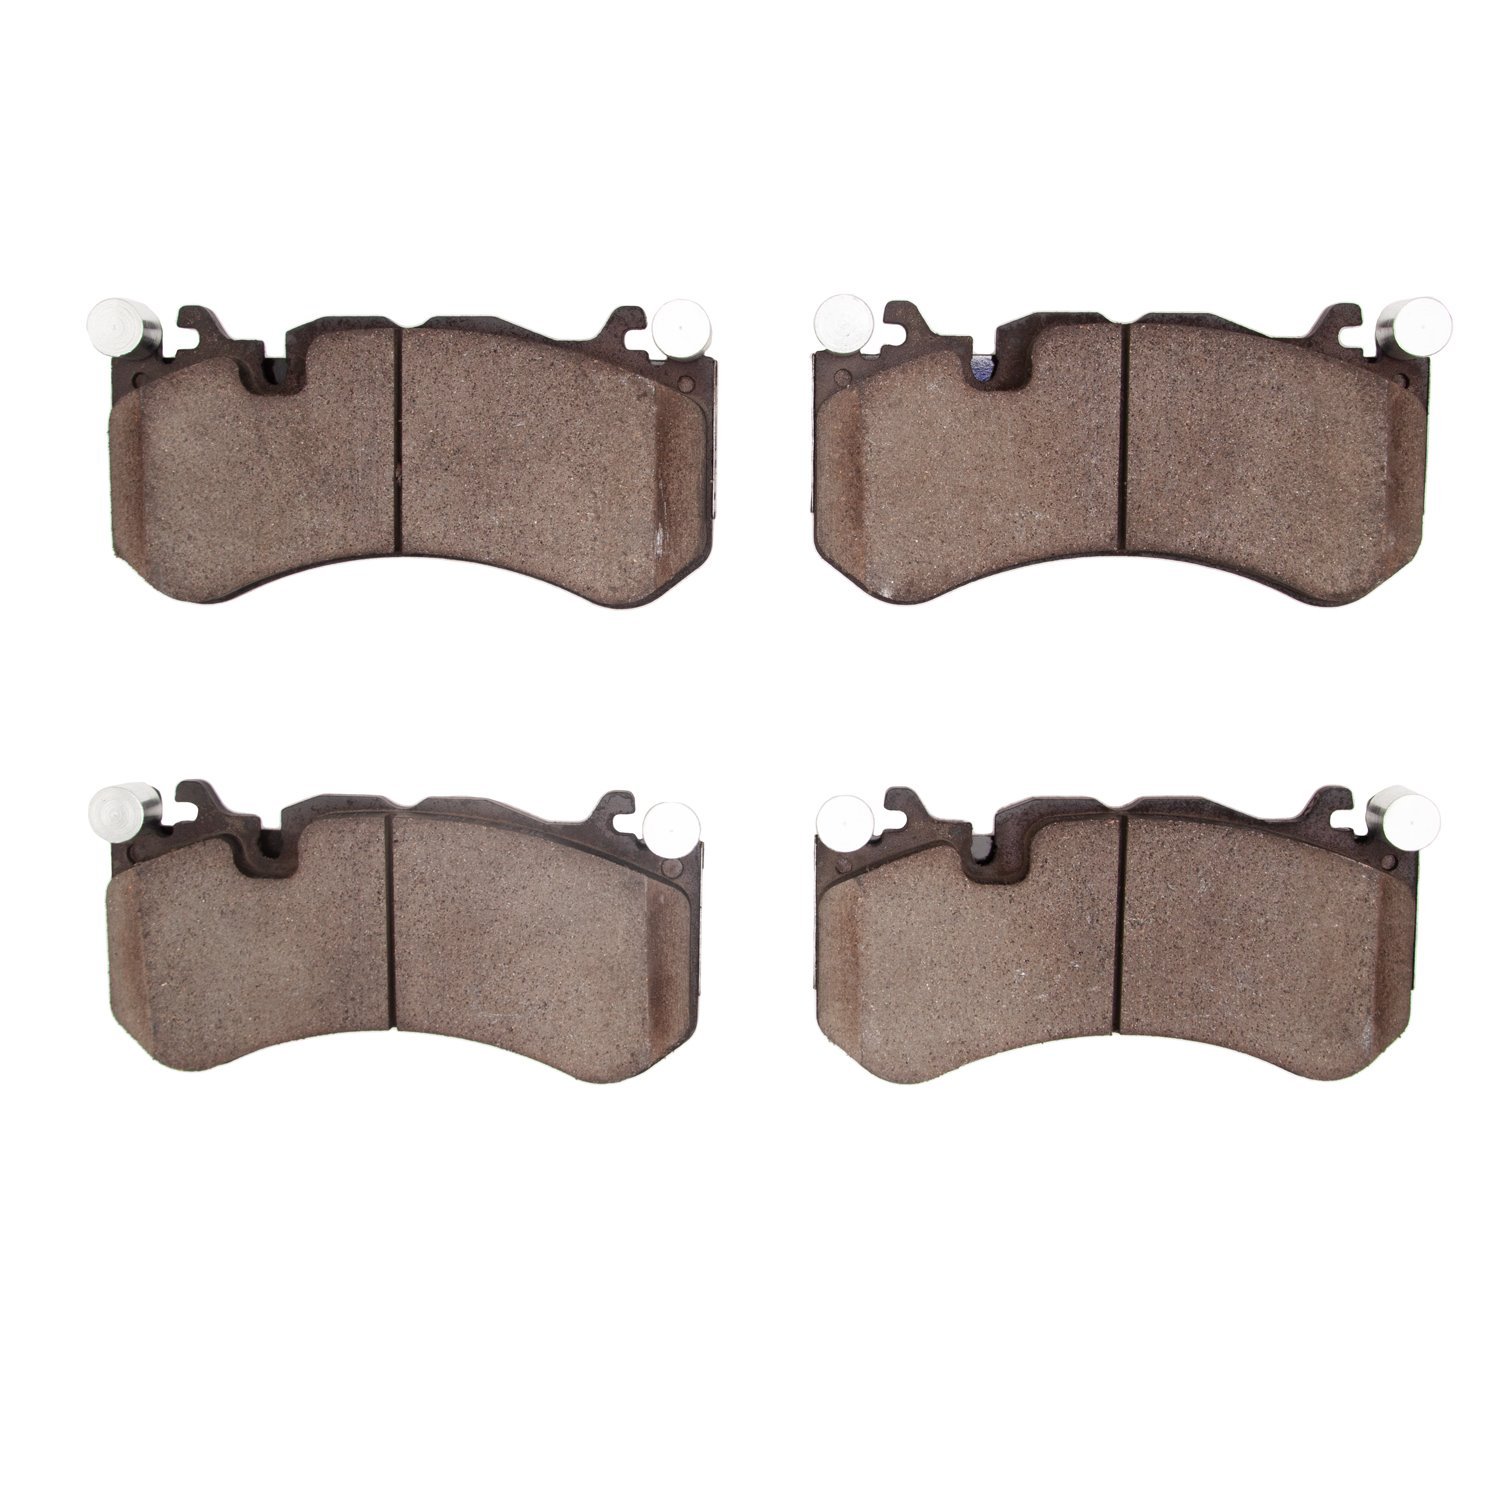 1310-1291-00 3000-Series Ceramic Brake Pads, Fits Select Multiple Makes/Models, Position: Front